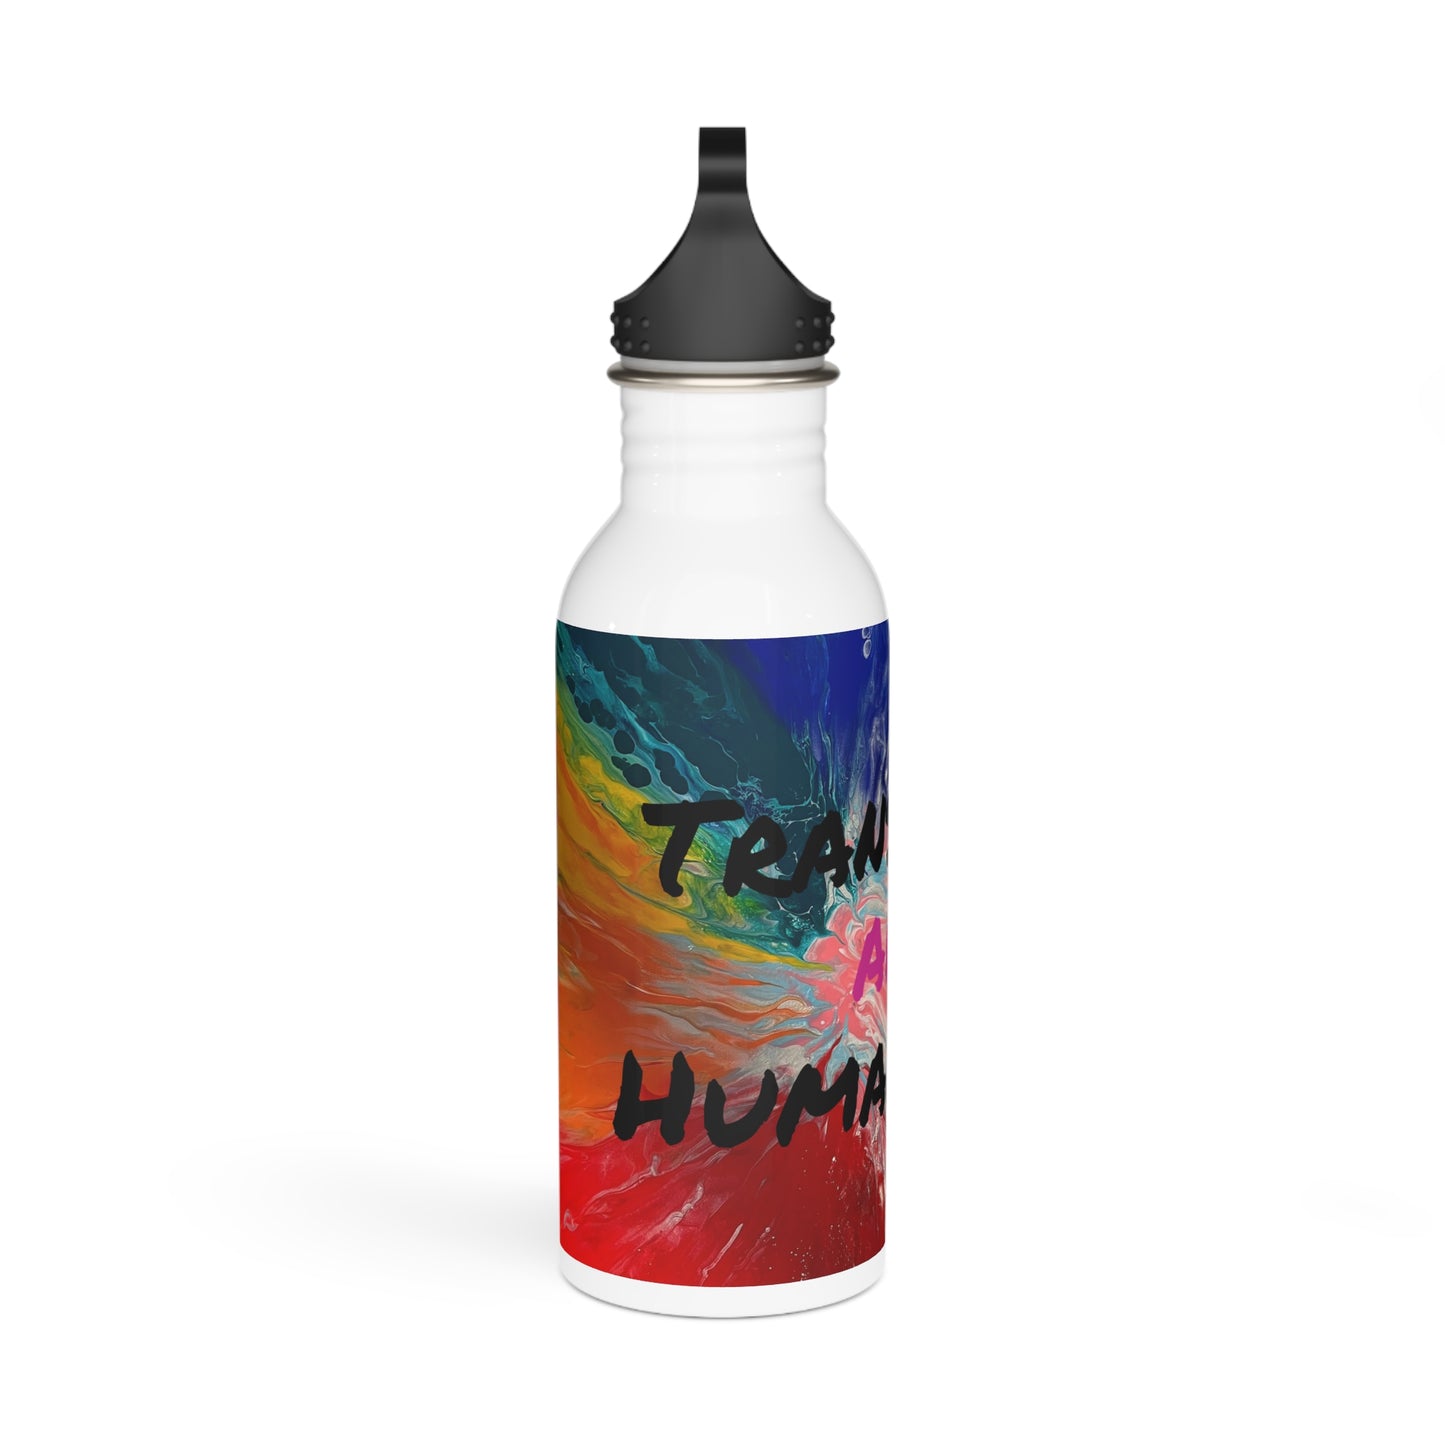 Trans Rights are Human Rights Stainless Steel Water Bottle